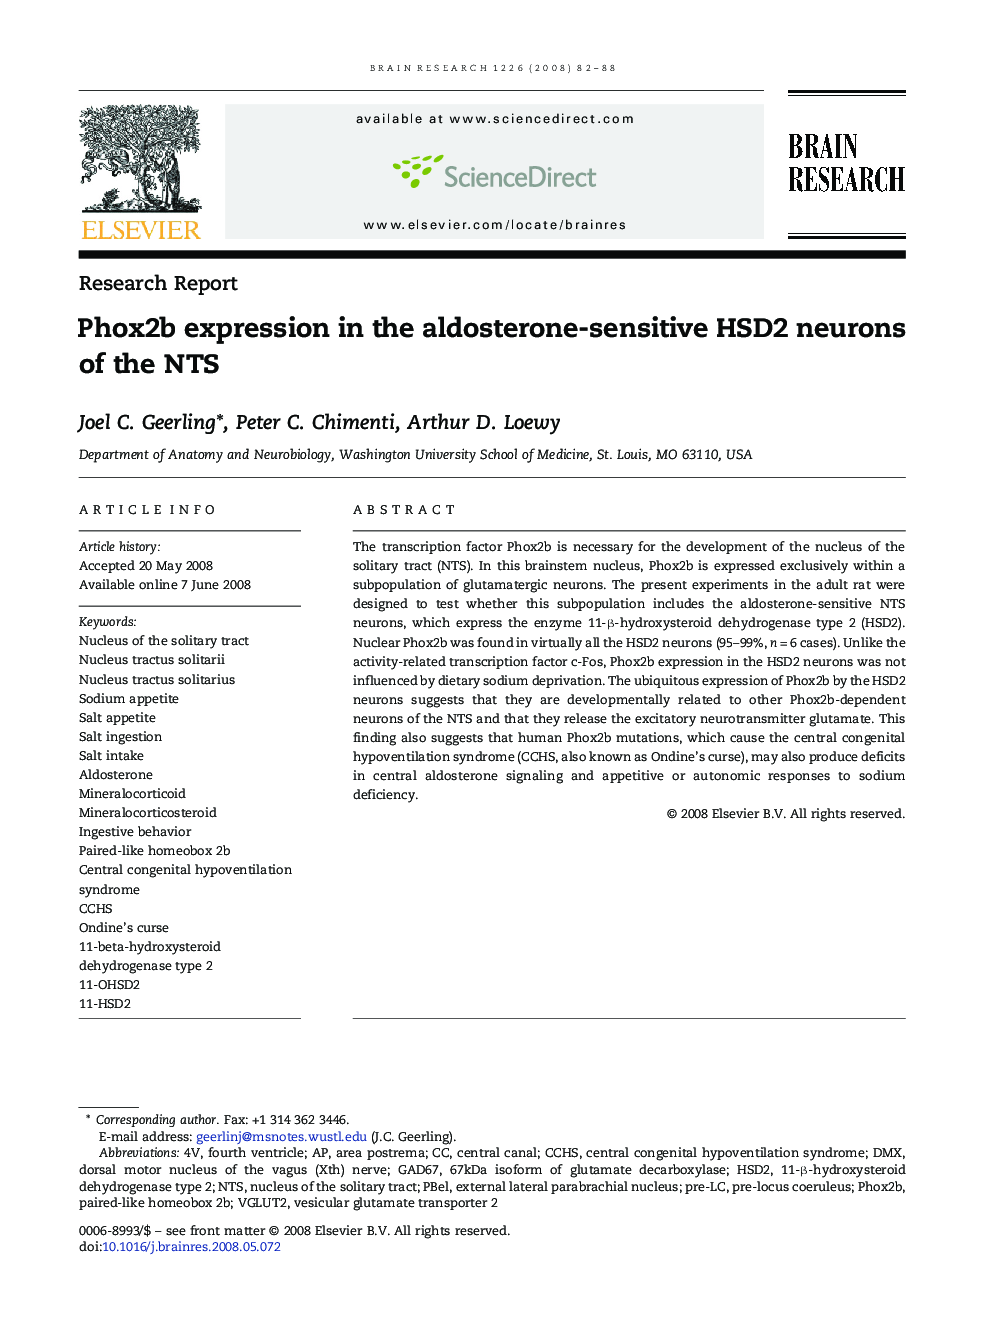 Phox2b expression in the aldosterone-sensitive HSD2 neurons of the NTS